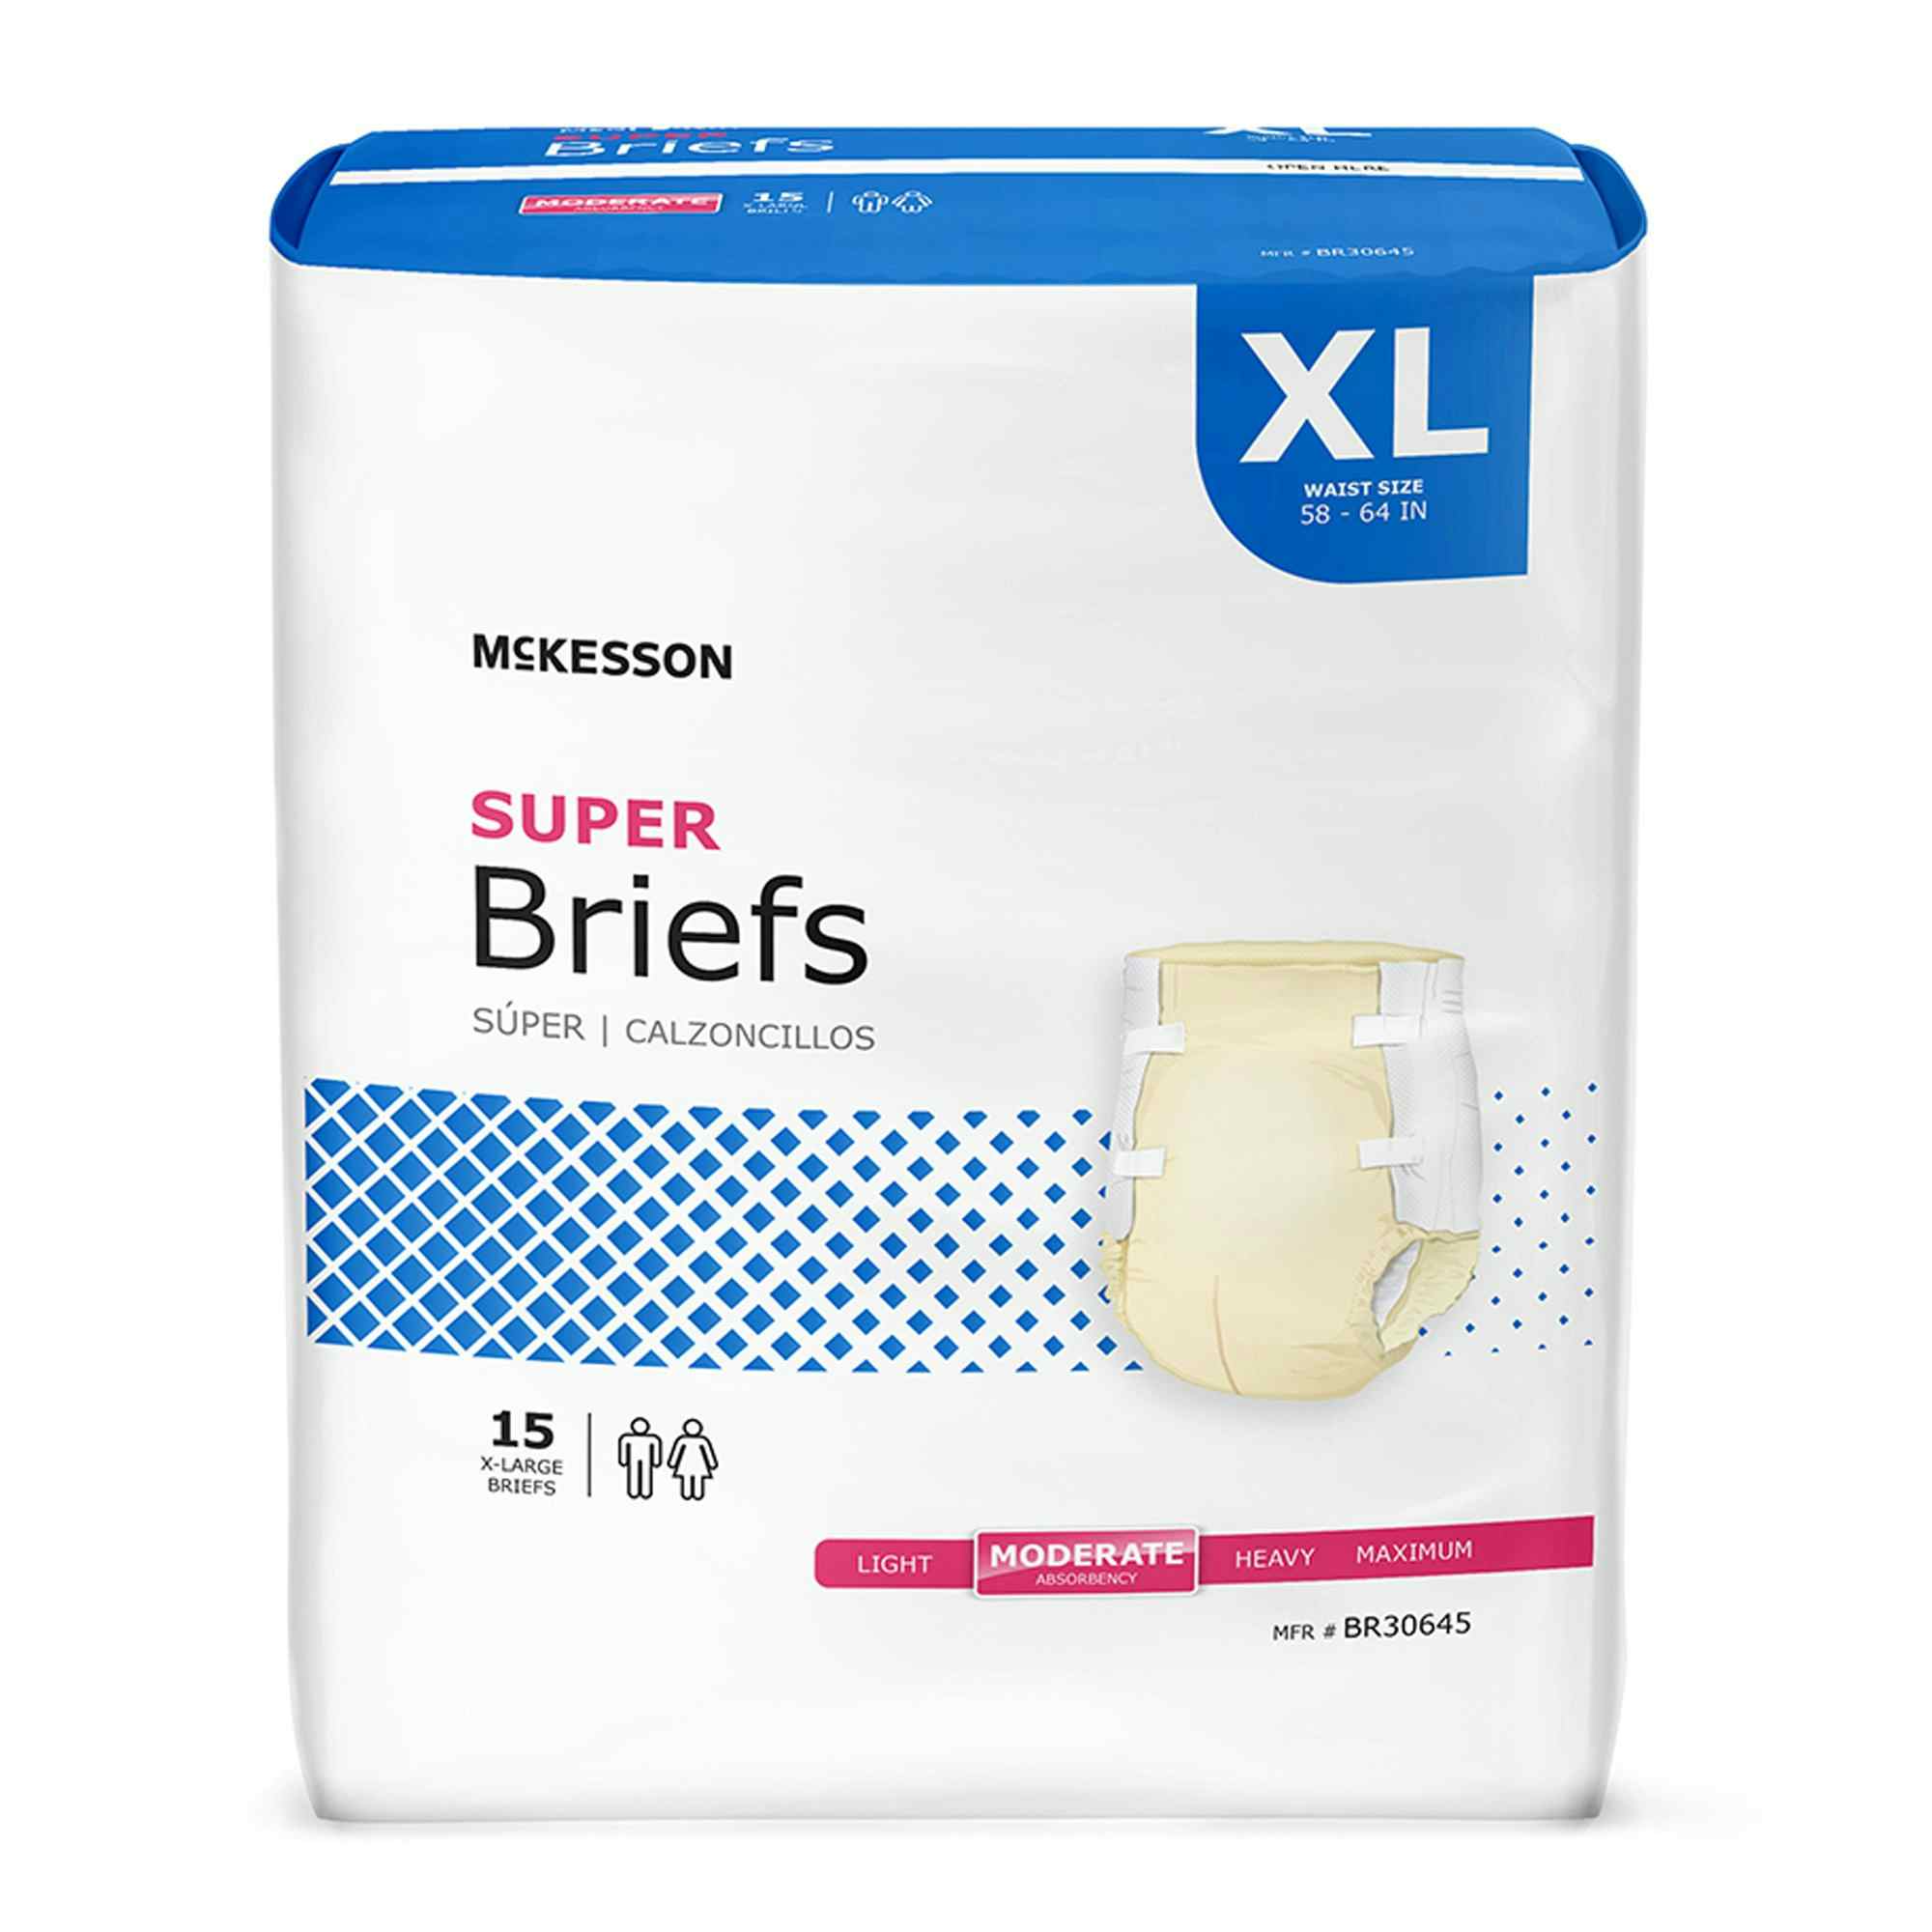 McKesson Super Brief Adult Diapers with Tabs, Moderate Absorbency, BR30645, Beige - X-Large (58-64") - Bag of 15